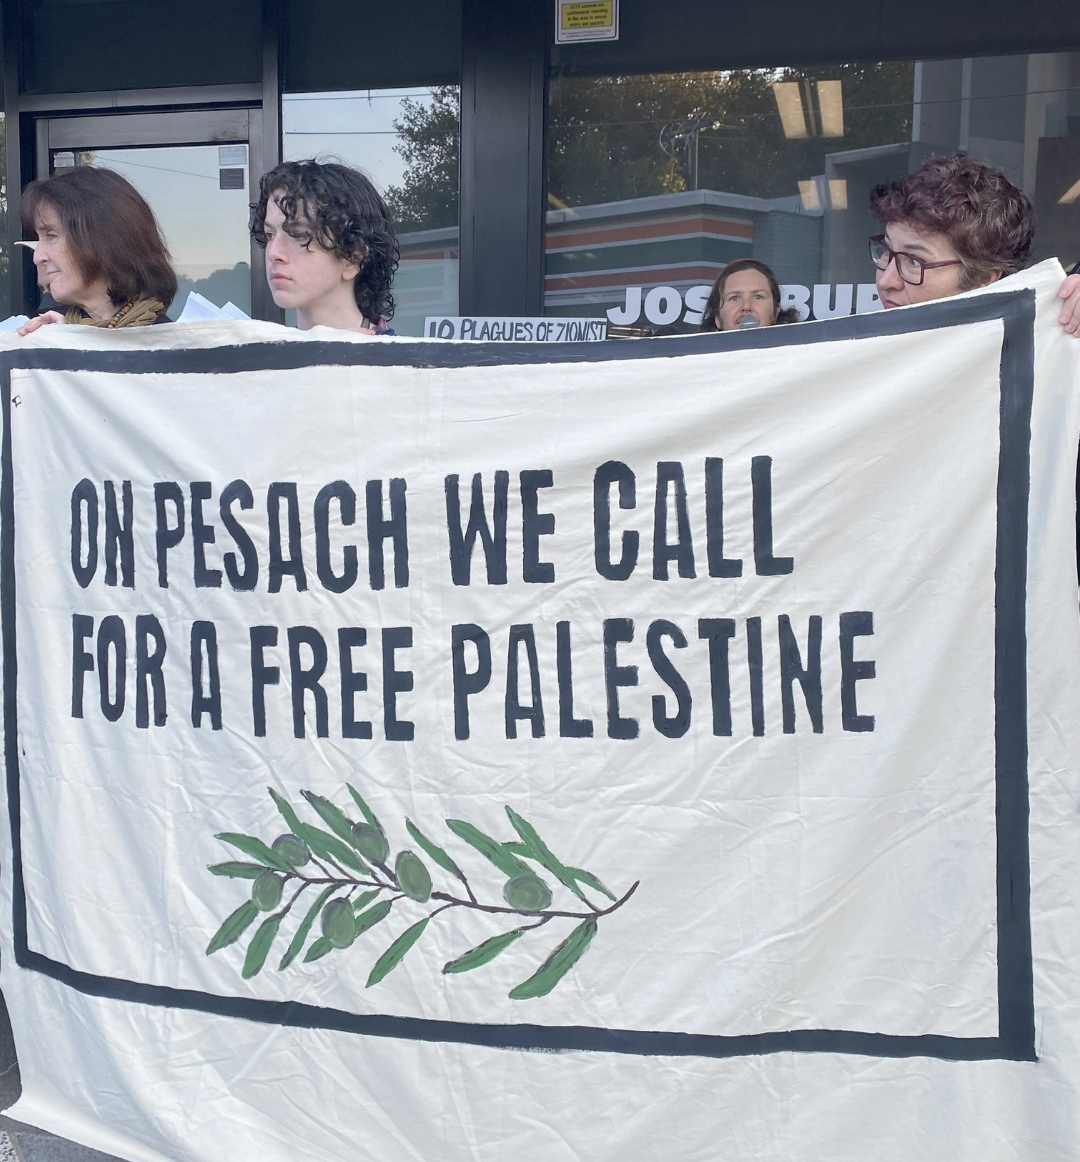 Protest Seder at Josh Burns' office. Image: @loudjewcollective